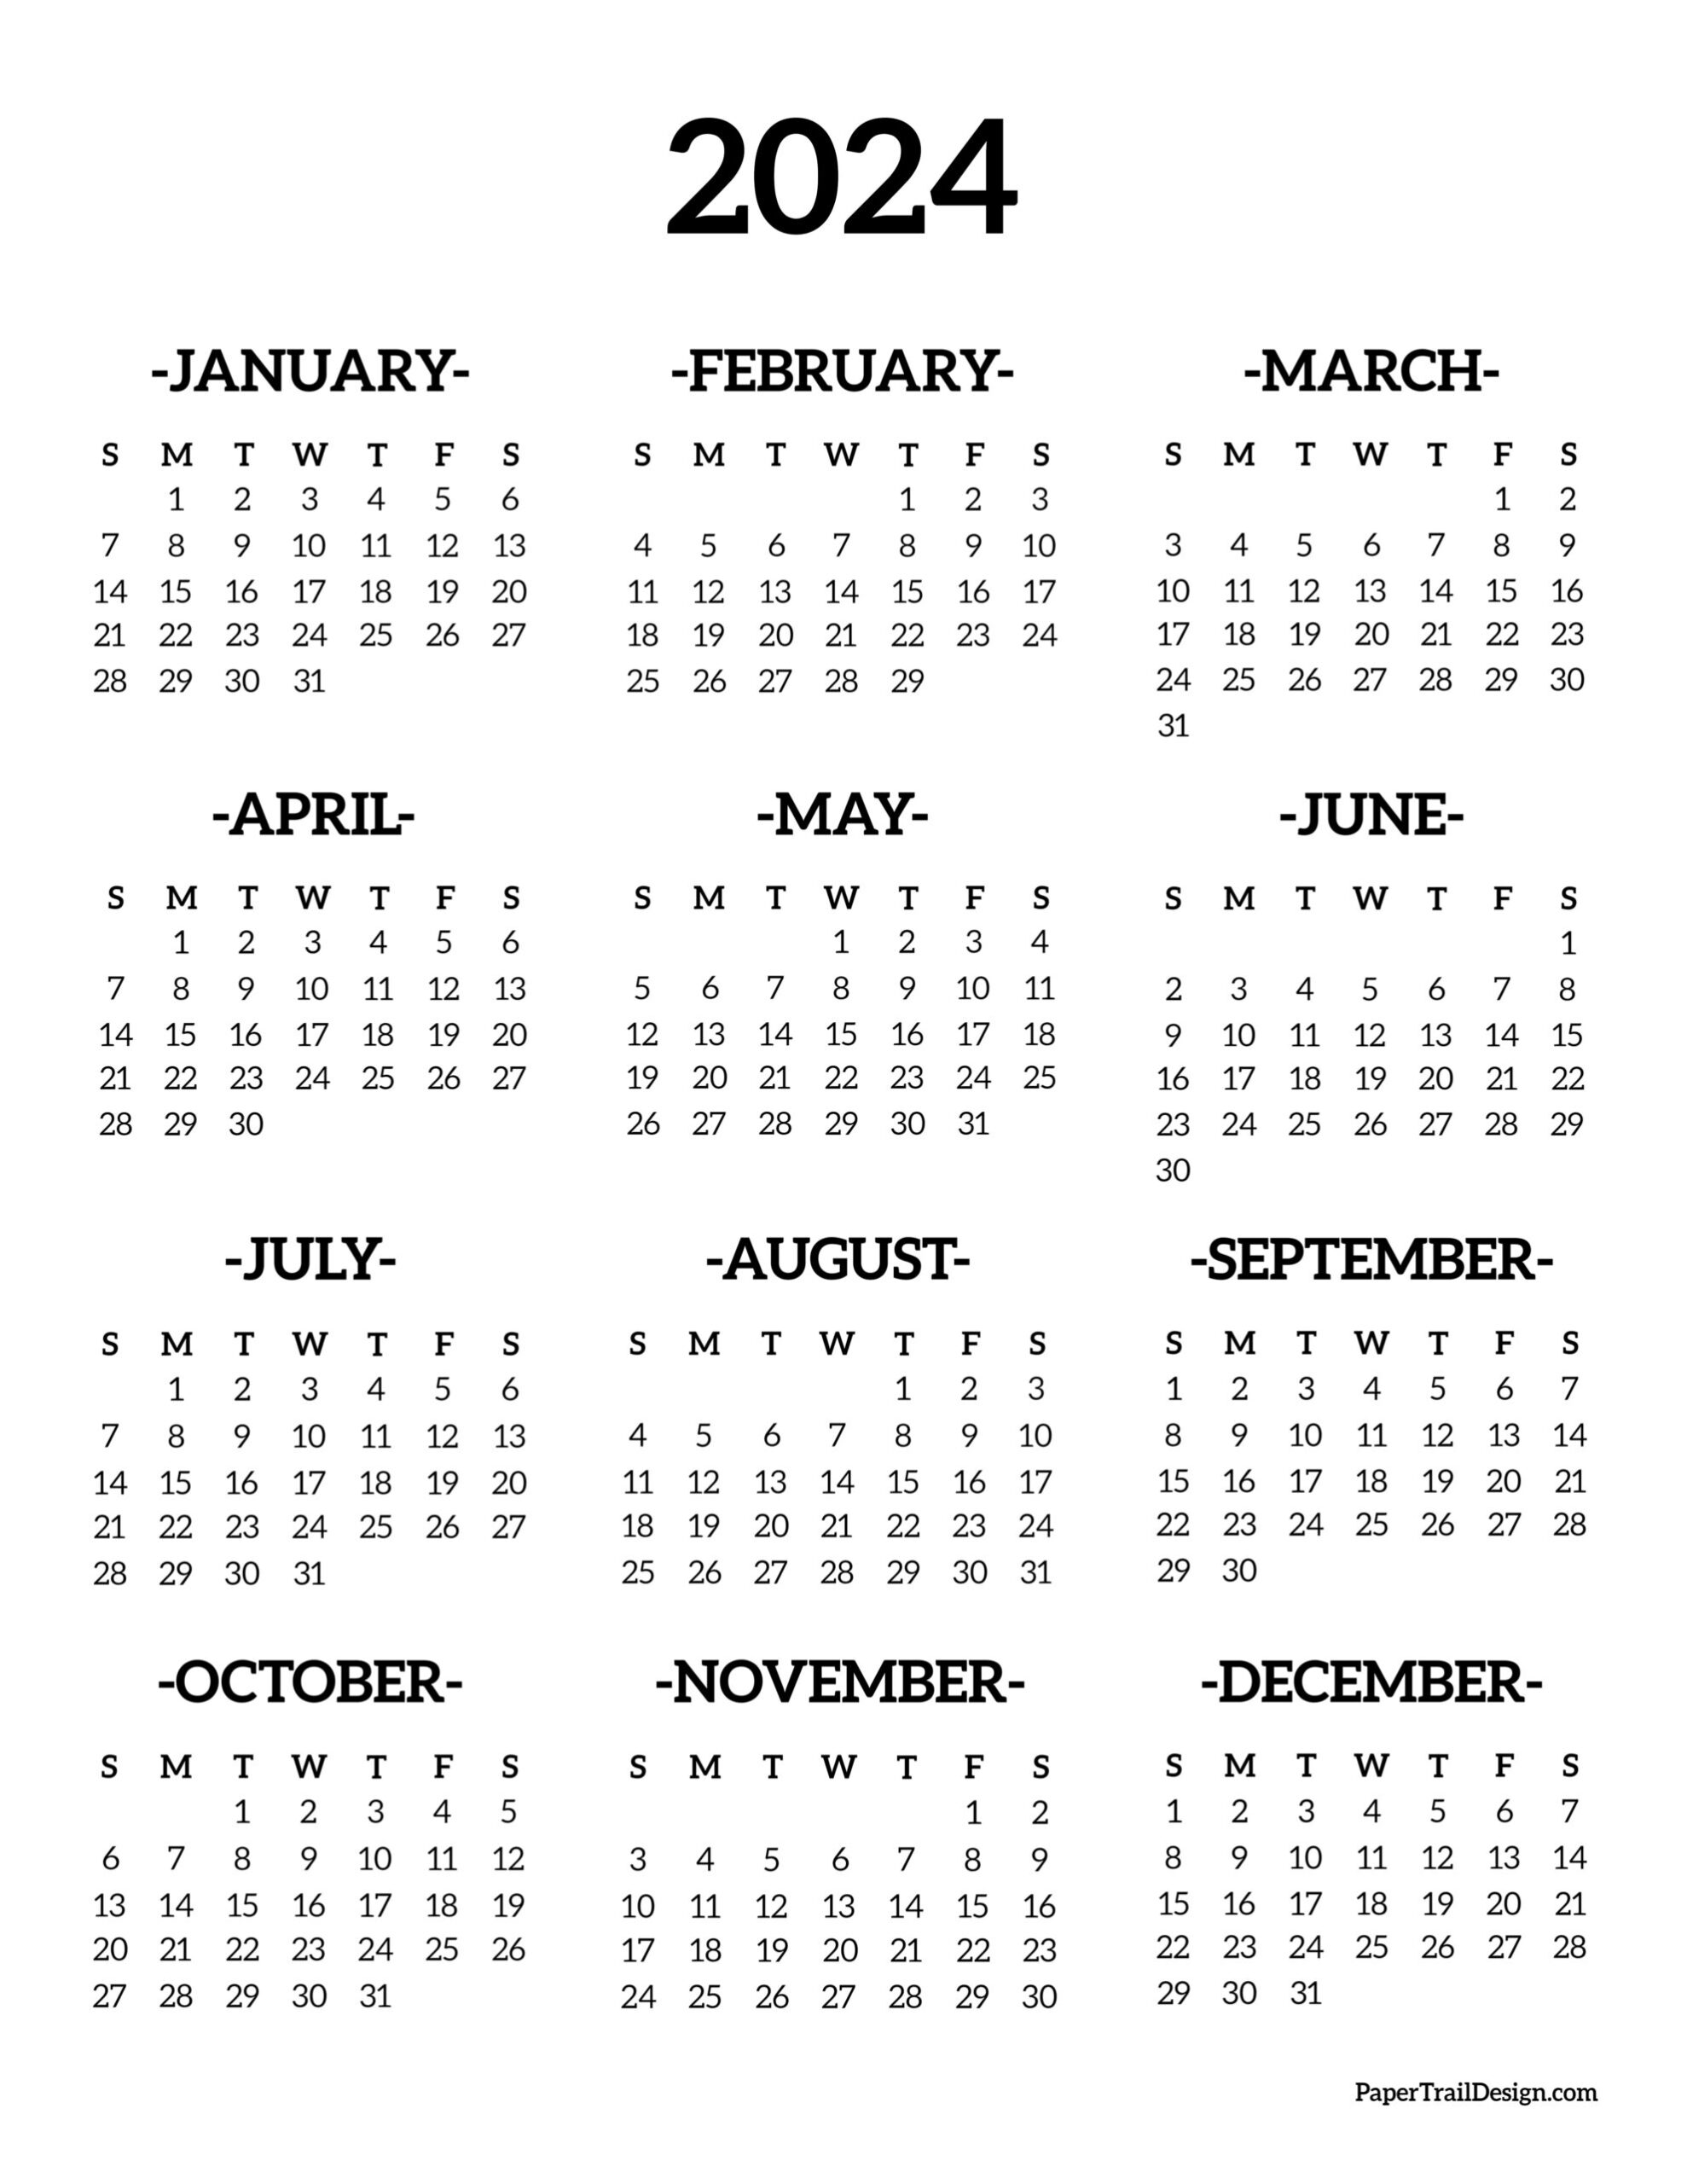 Calendar 2024 Printable One Page - Paper Trail Design for Yearly Calendar 2024 Free Printable